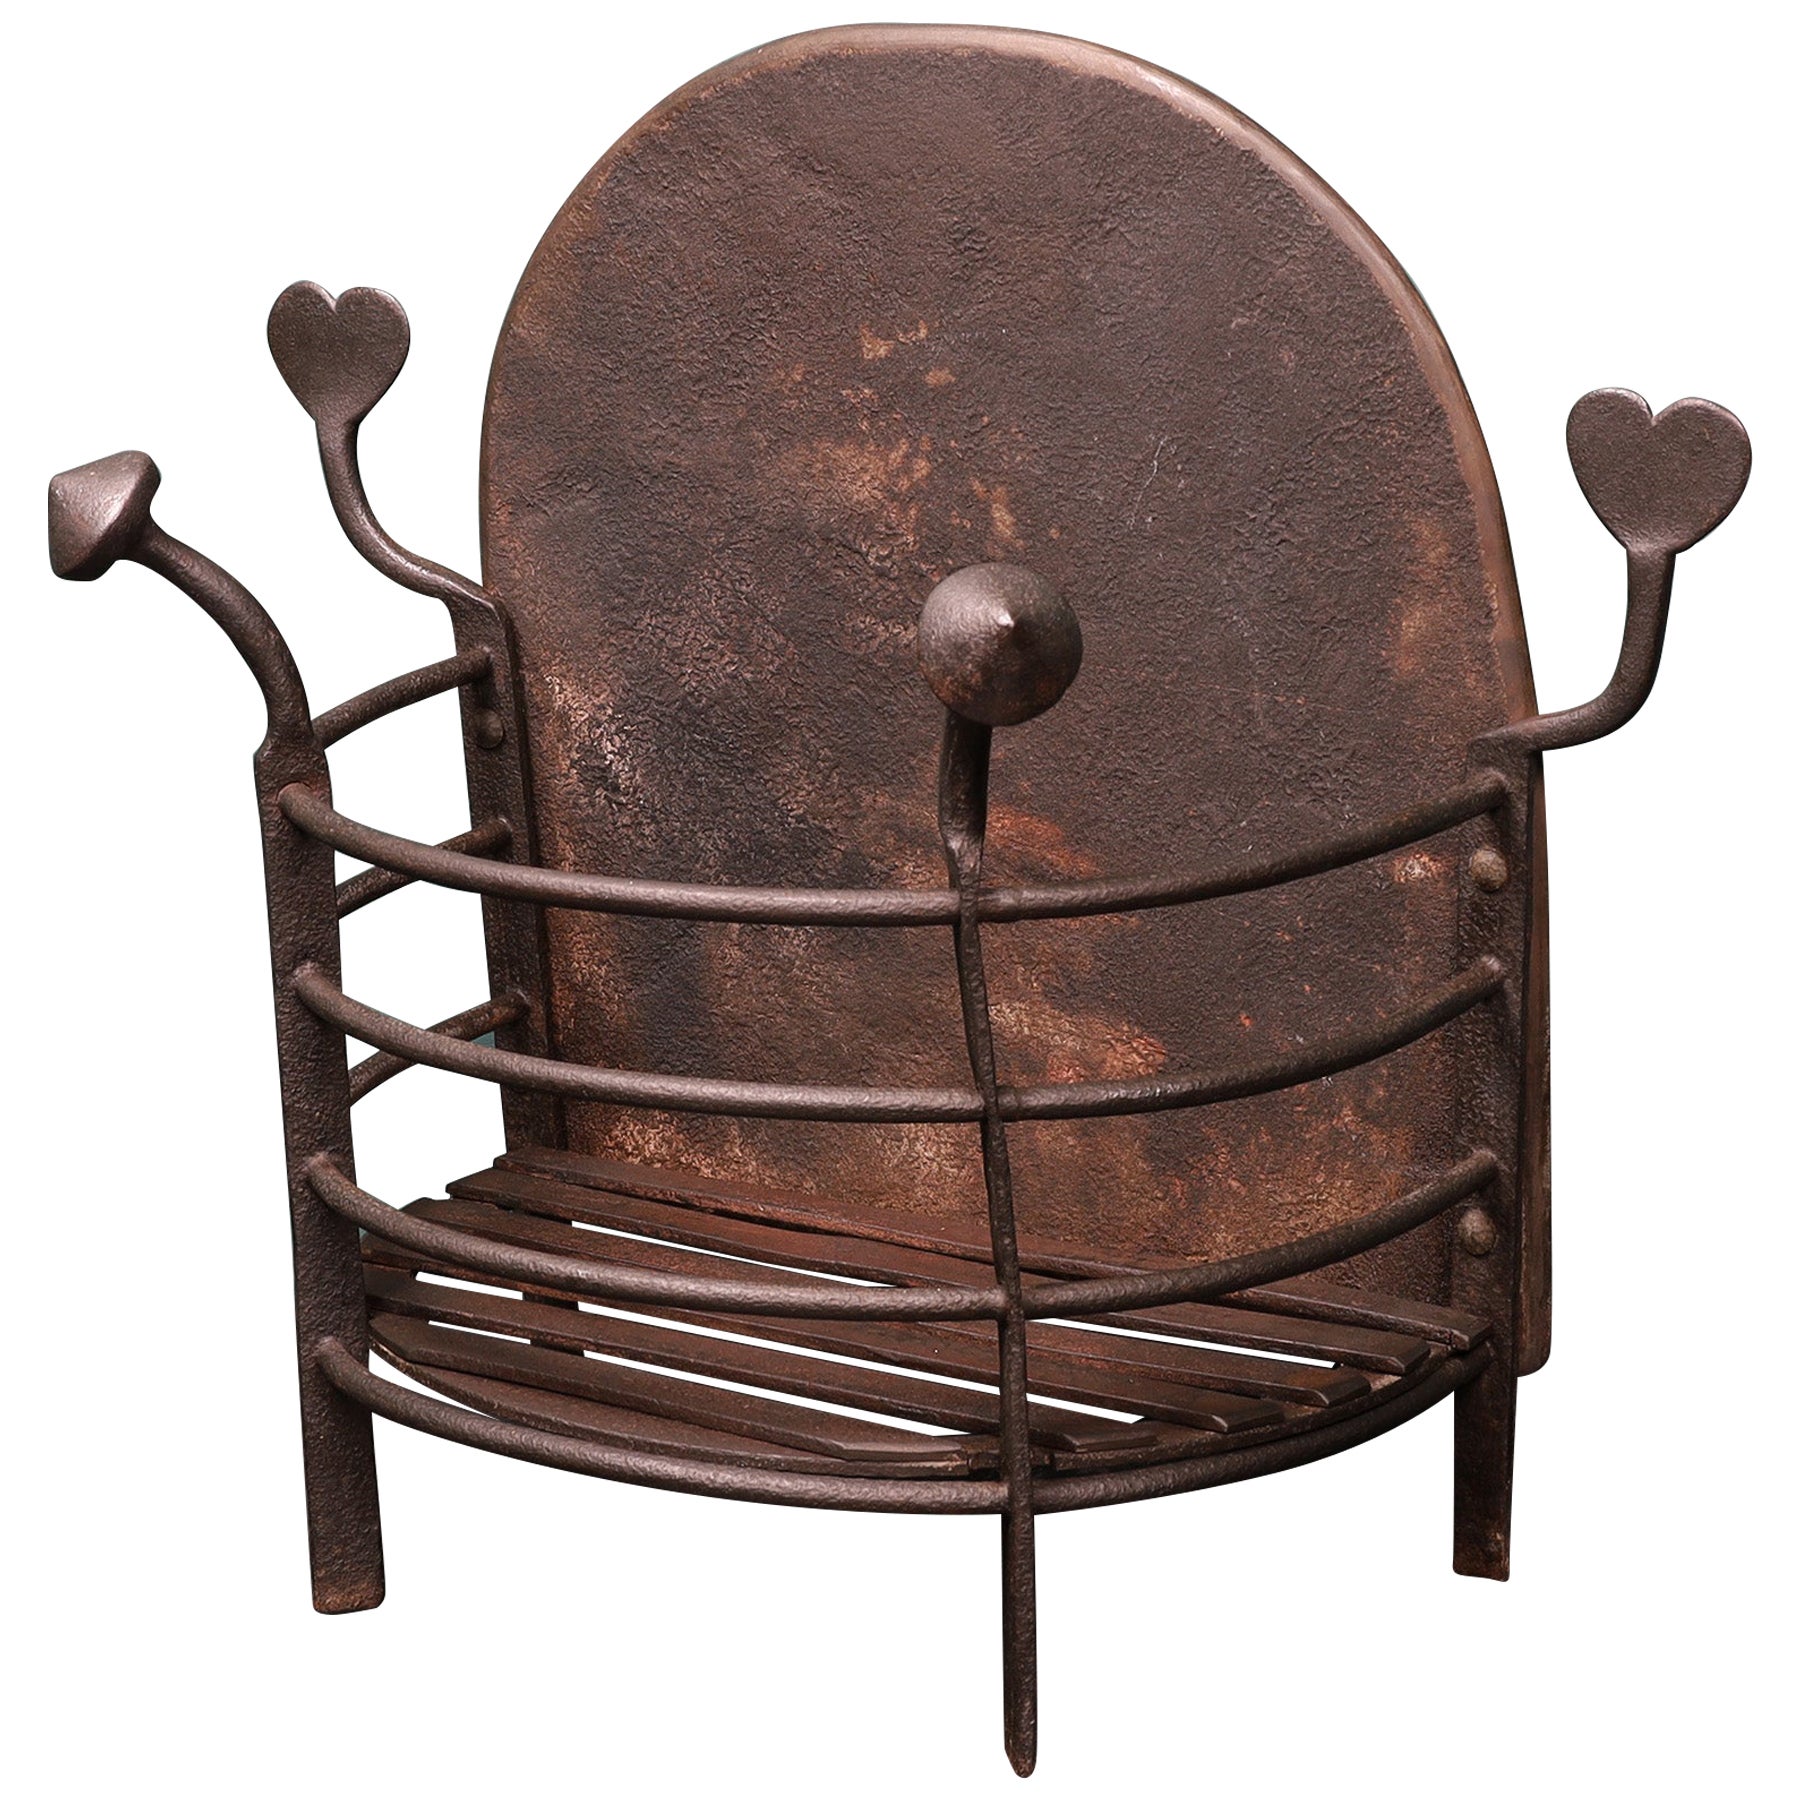 An Arts & Crafts Semi-Circular Wrought Fire Basket with Heart-Shaped finials For Sale